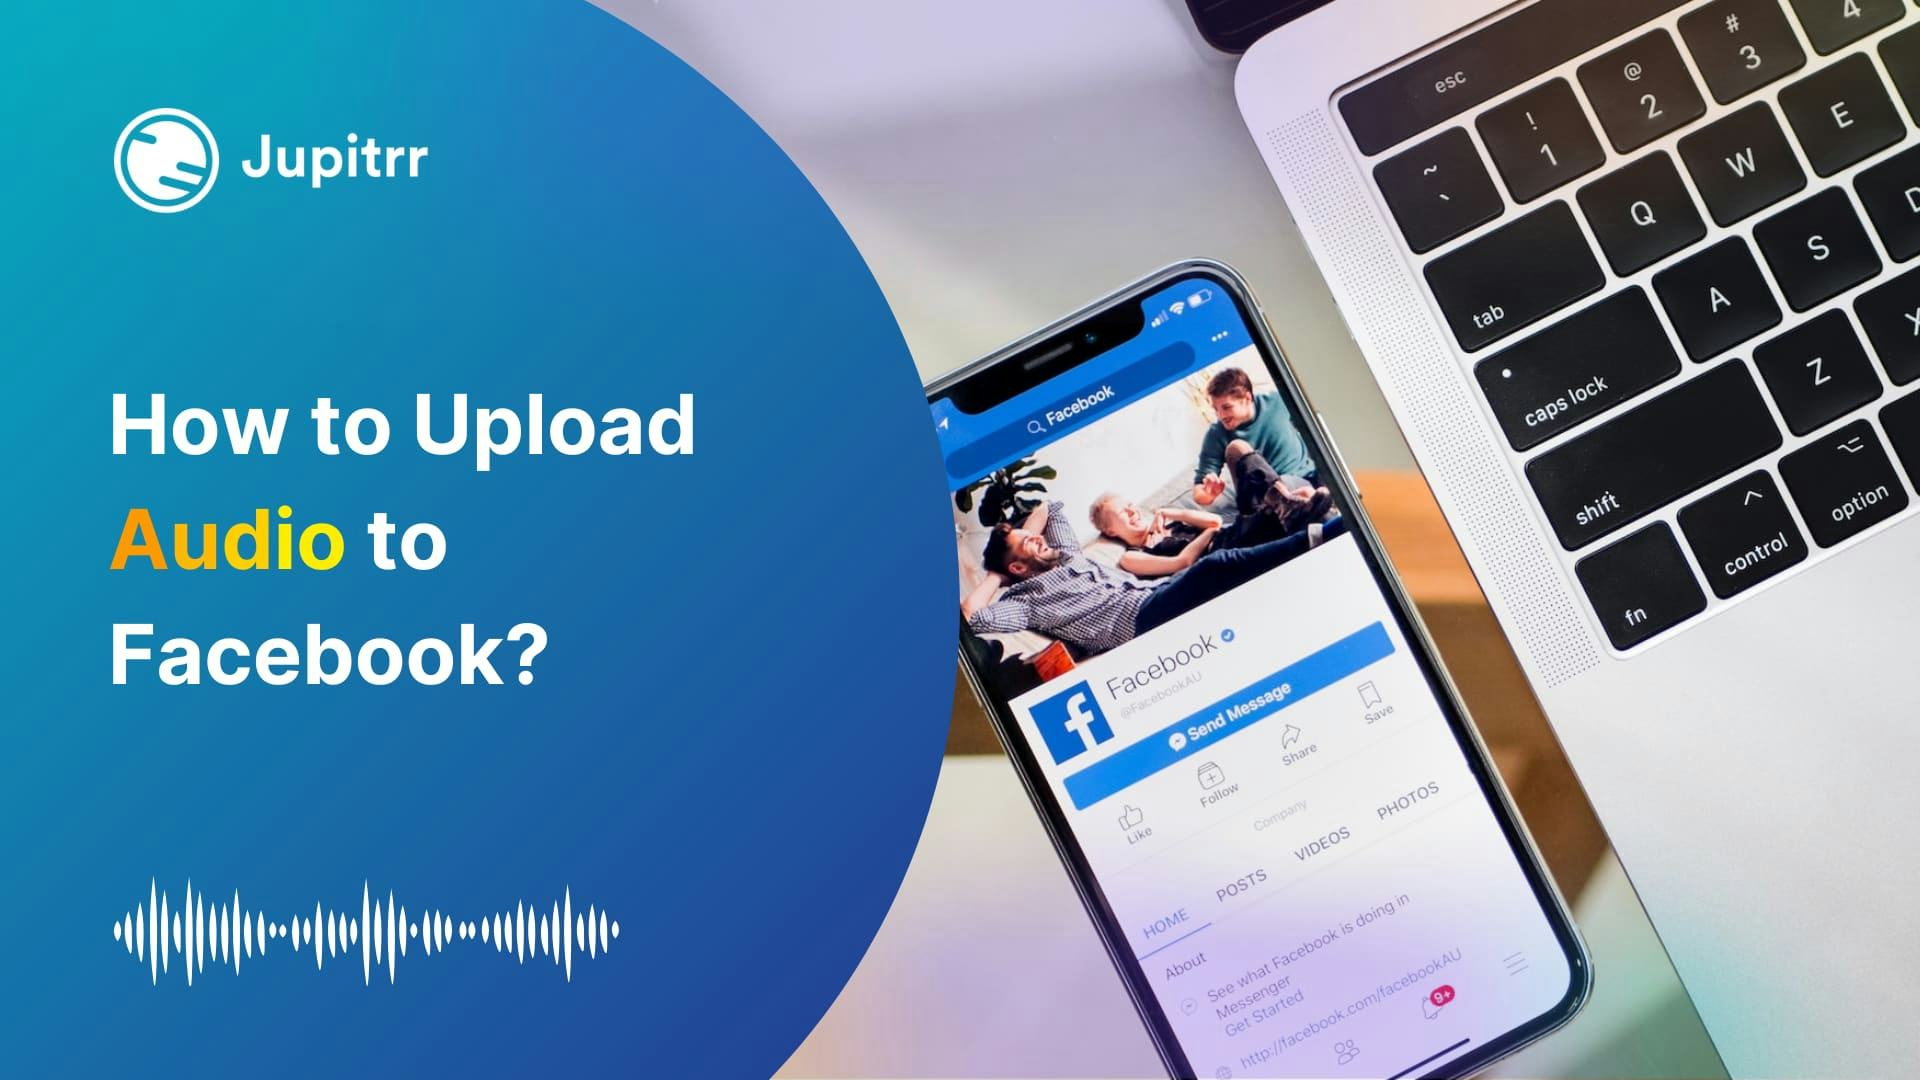 How to Upload Audio to Facebook?